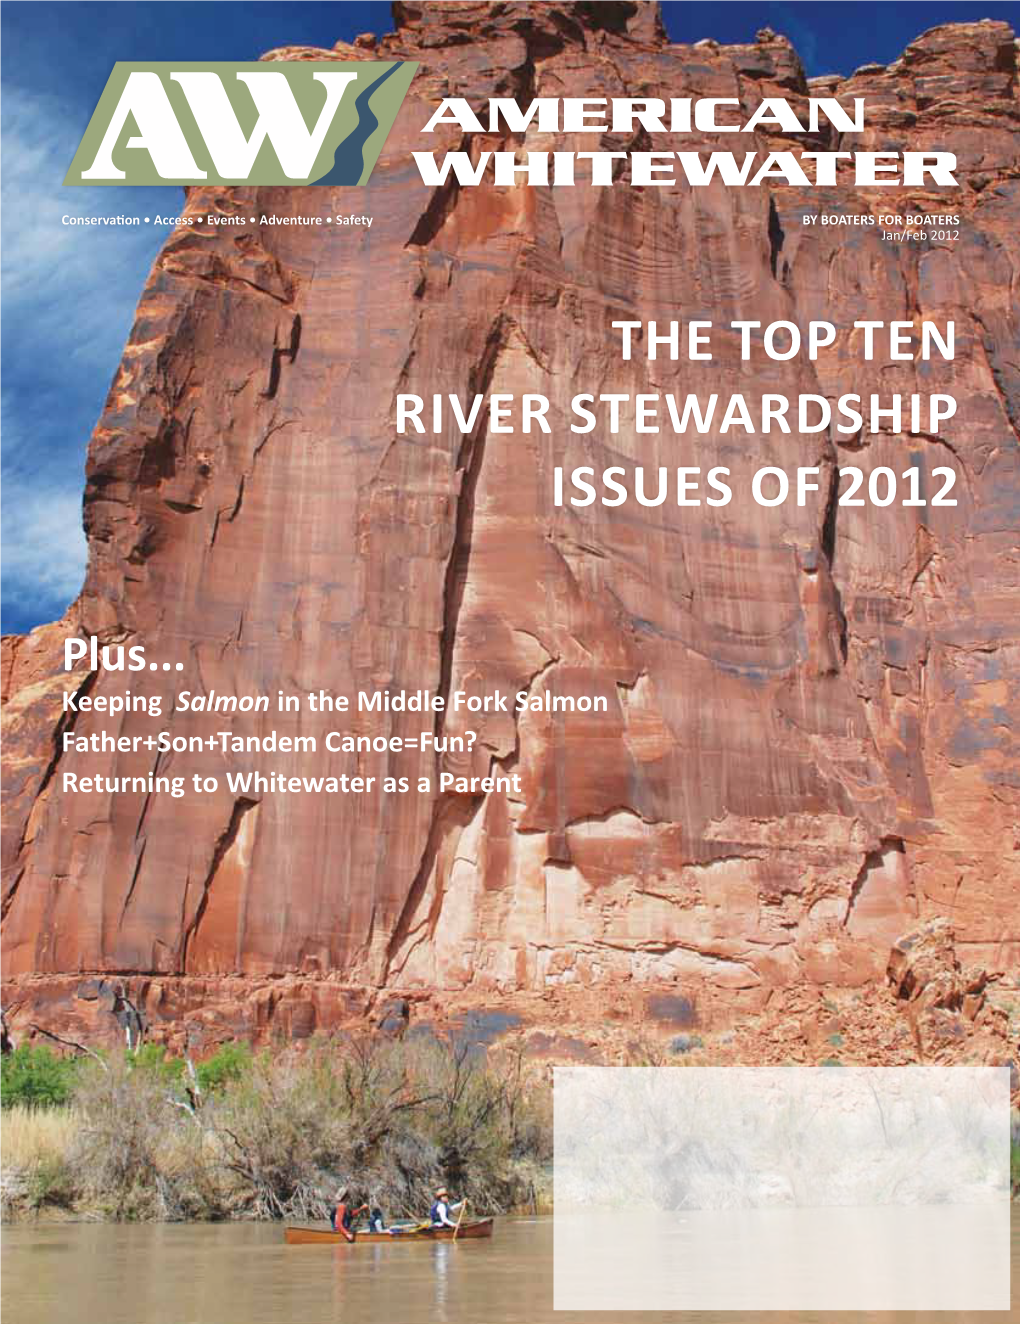 The Top Ten River Stewardship Issues of 2012